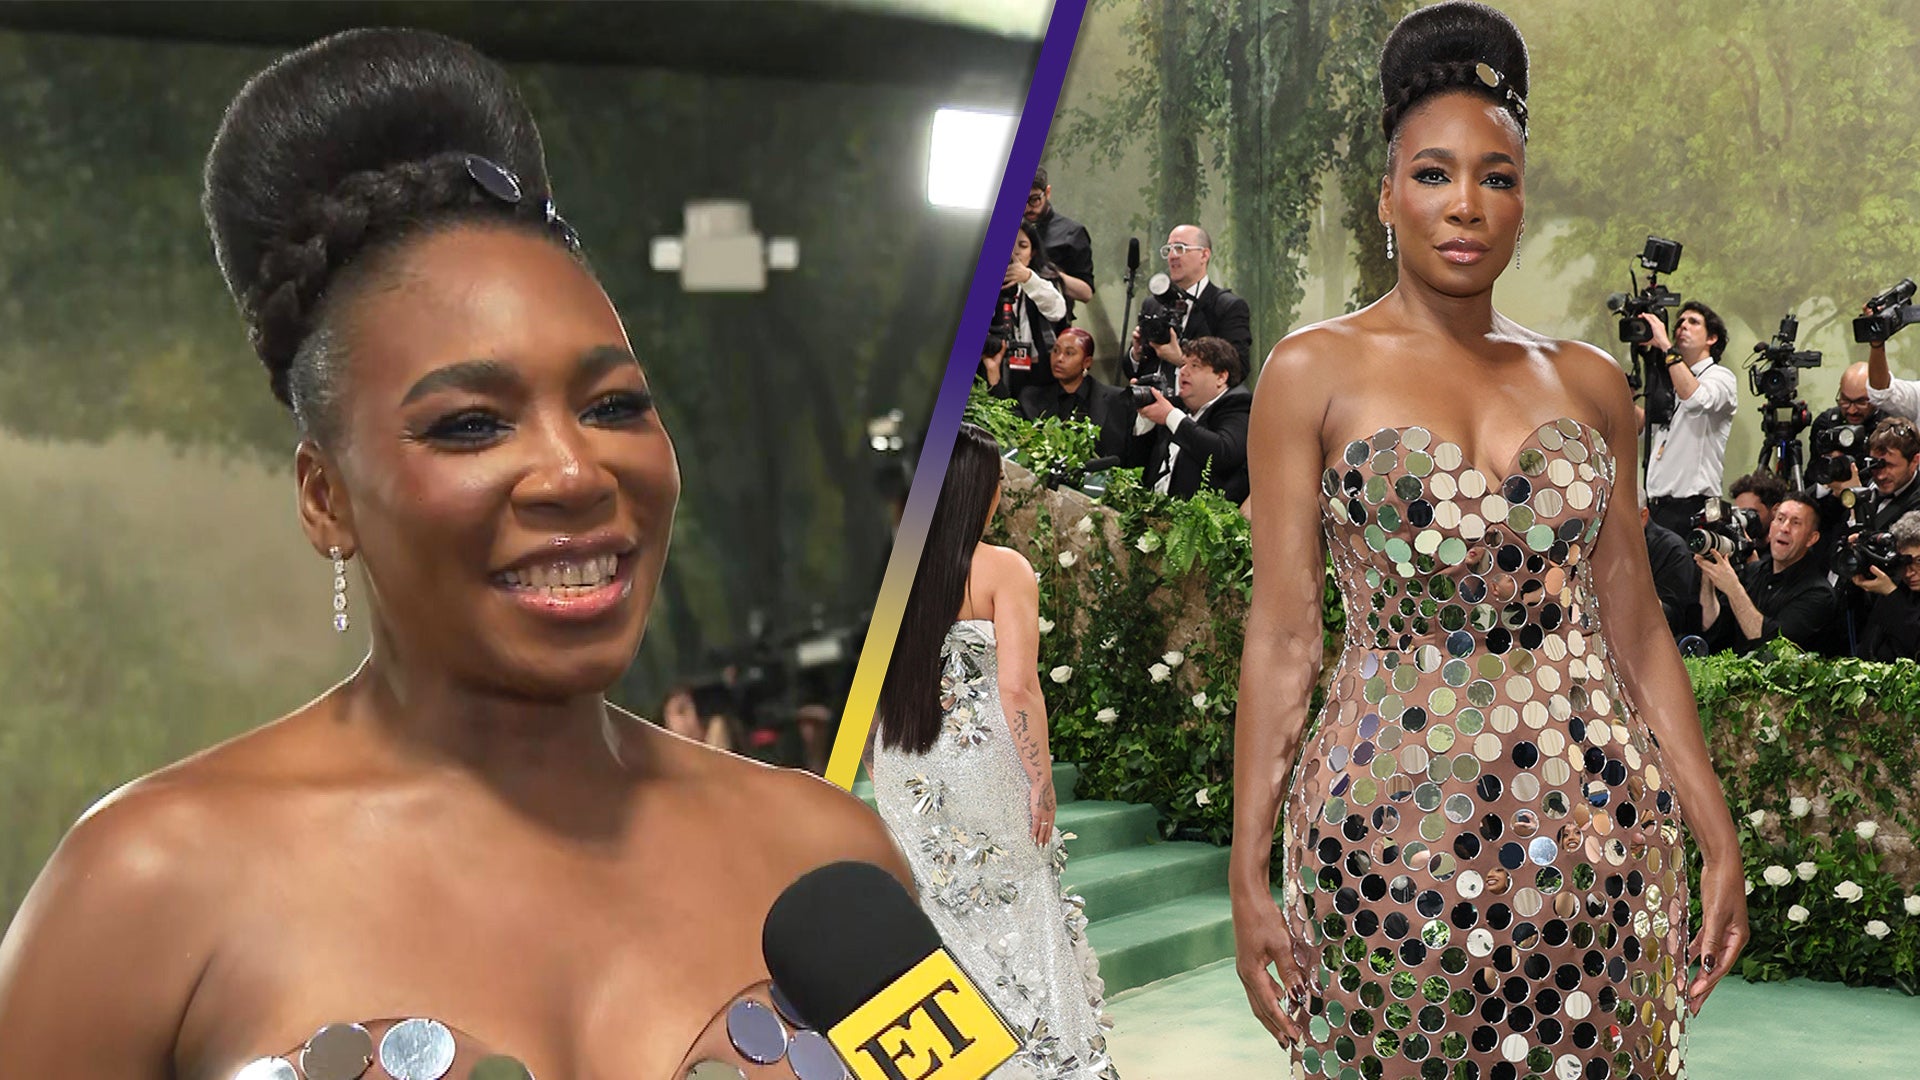 Met Gala 2024: Venus Williams ‘More Intimidated’ by Event Than ‘Any Match’ She's Played (Exclusive)